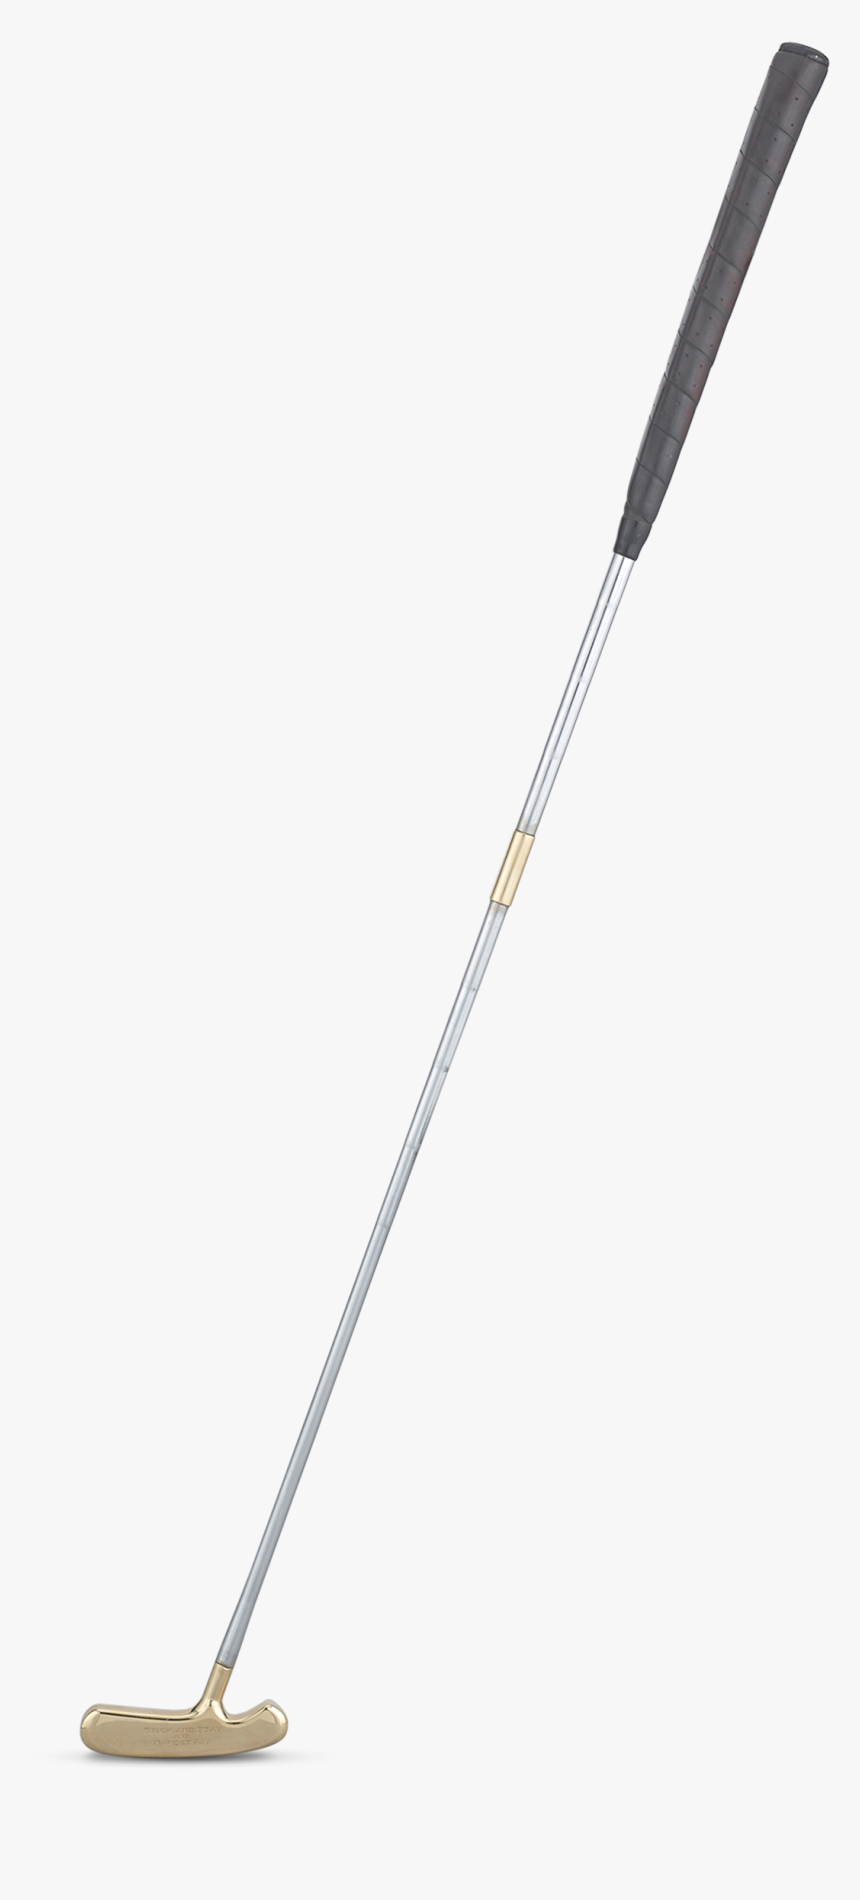 Presentation Gold Golf Putter By Tiffany & Co - Pitching Wedge, HD Png Download, Free Download